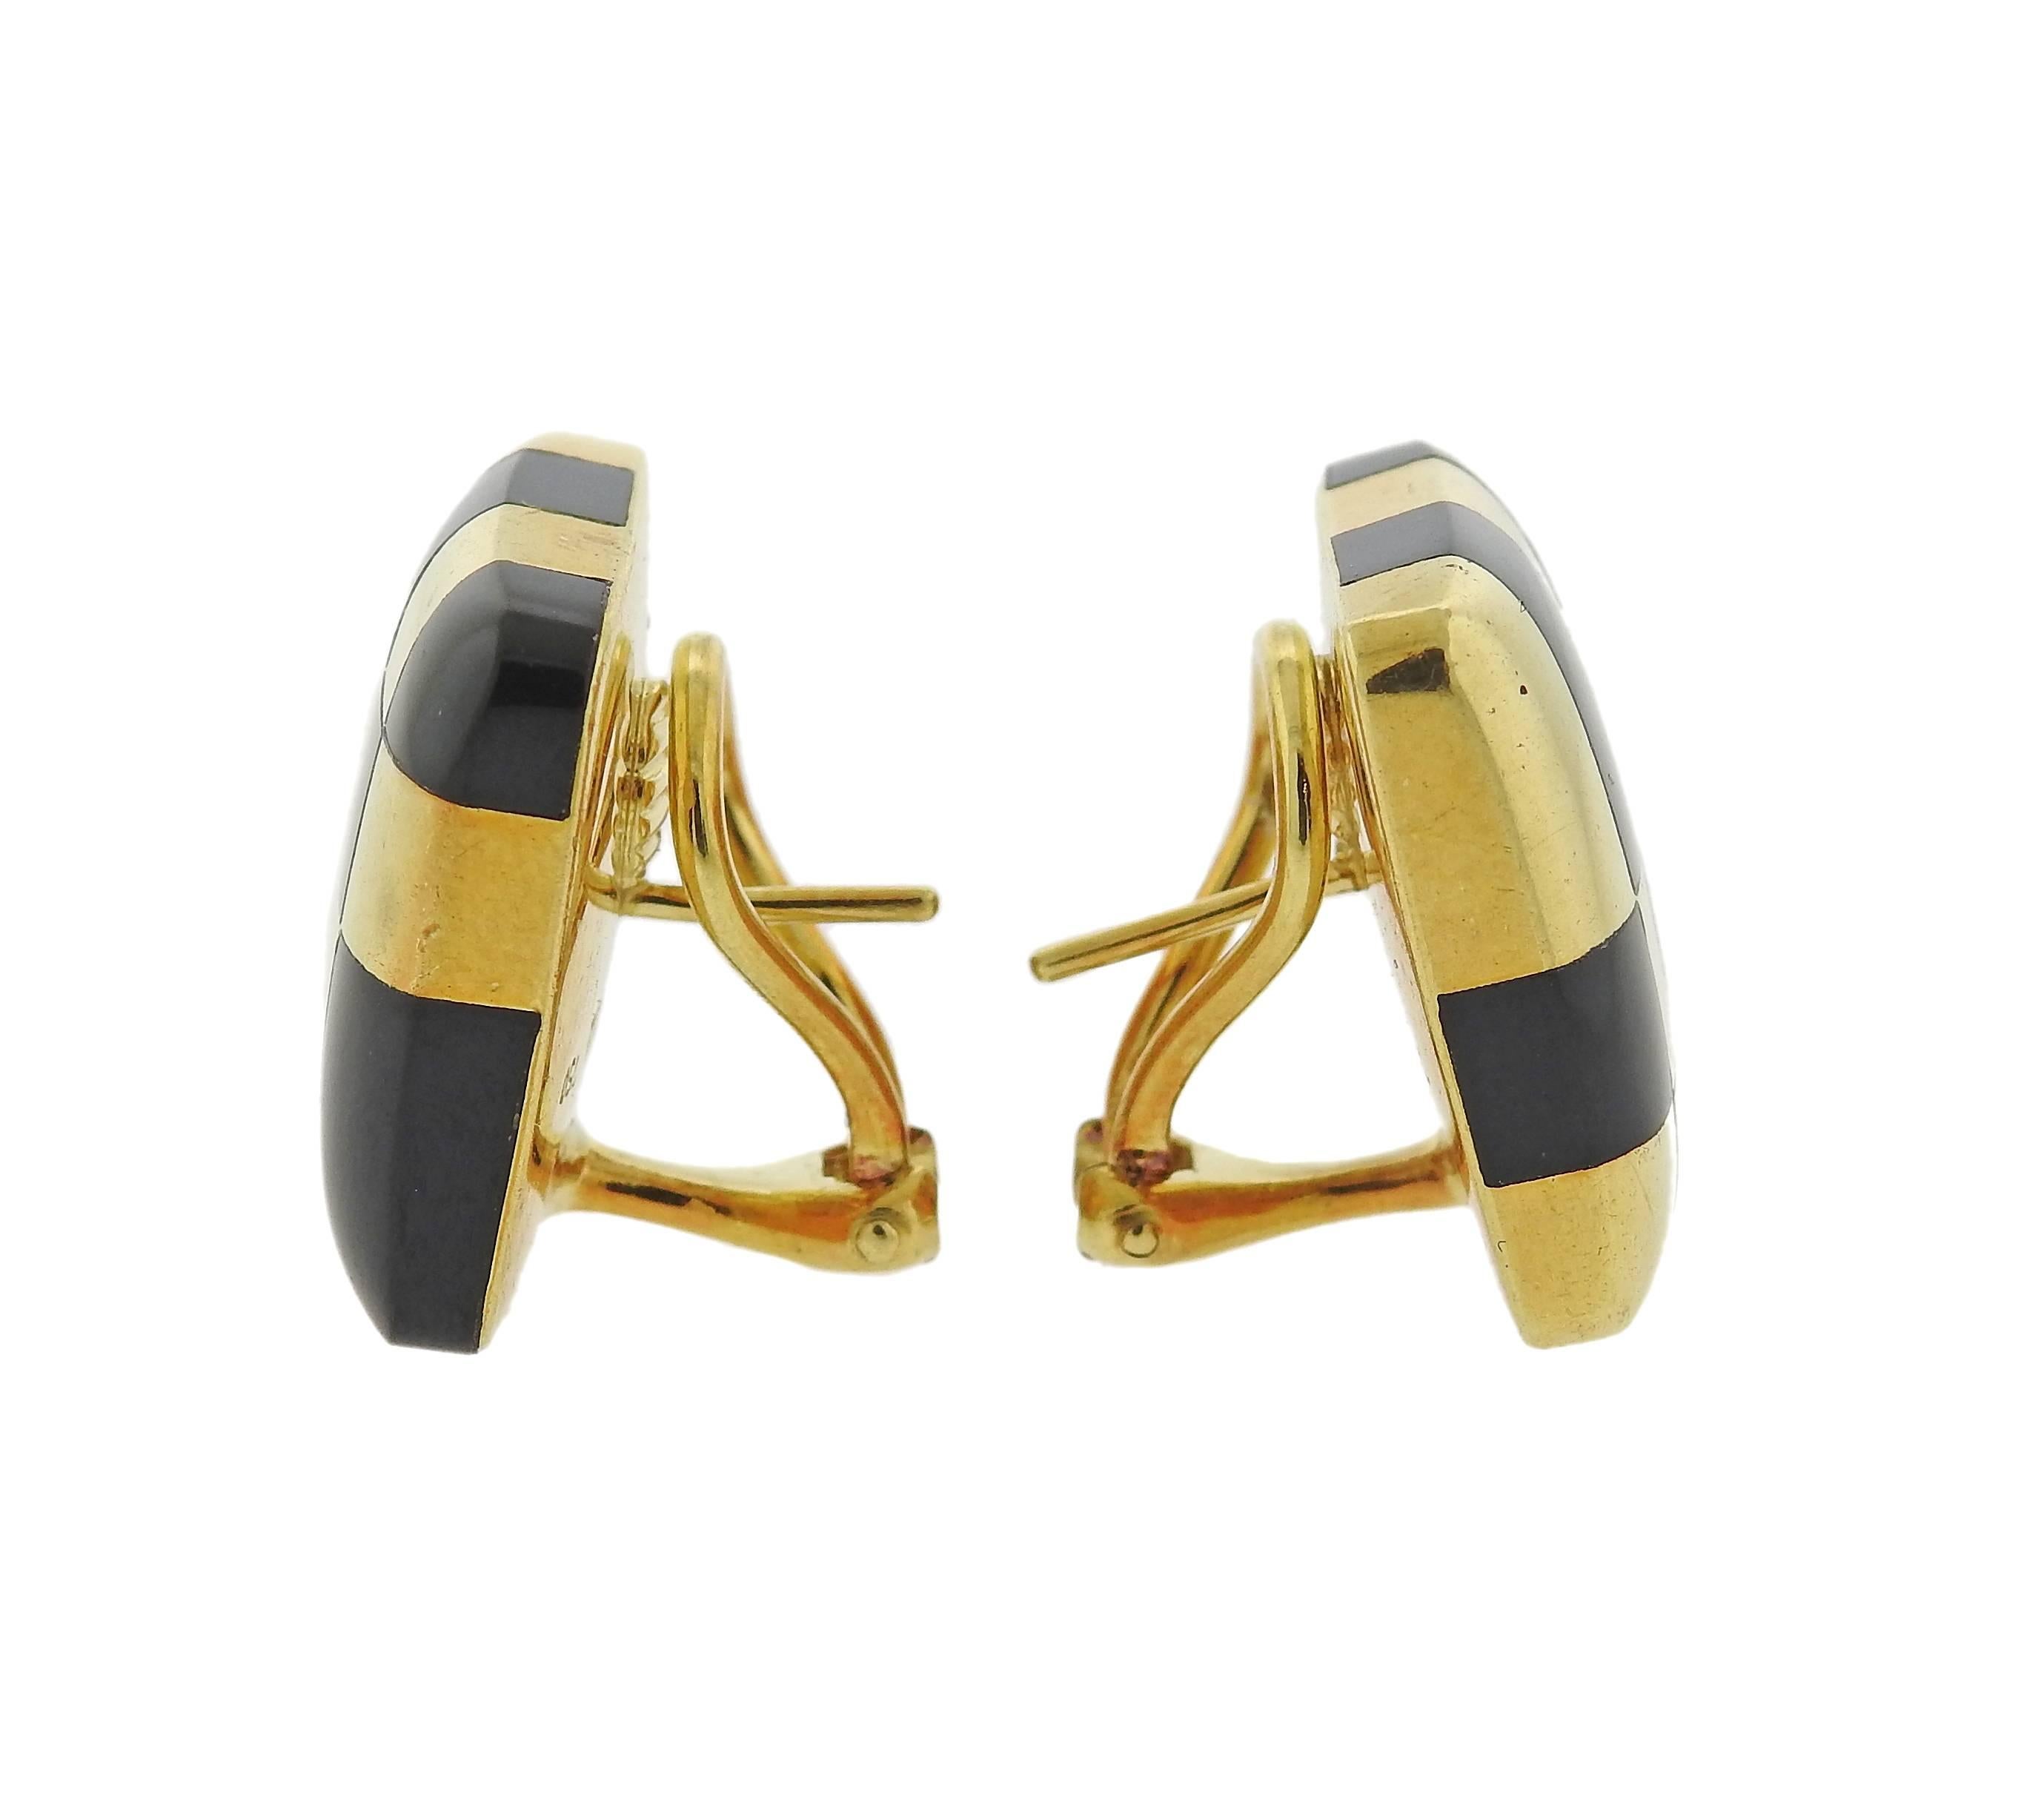 Pair of classic 18k yellow gold earrings, crafted by Tiffany & Co, set with black jade inlay.  Earrings are 20mm x 20mm.  Marked; T & Co, 750, 1982. Weight: 17.5 grams. 